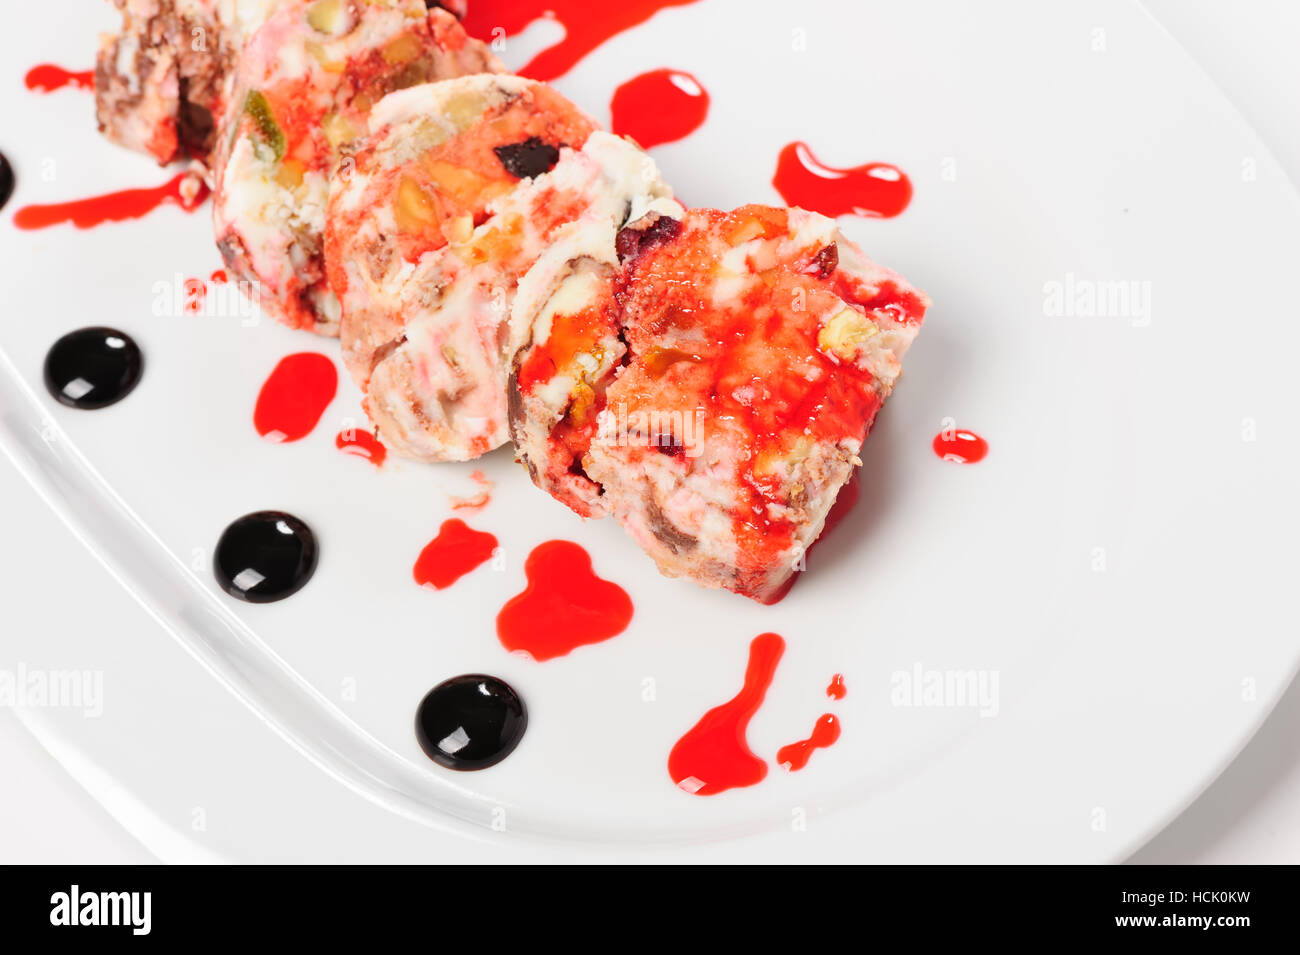 Semifreddo dessert with forest fruits and pistachio nuts Stock Photo